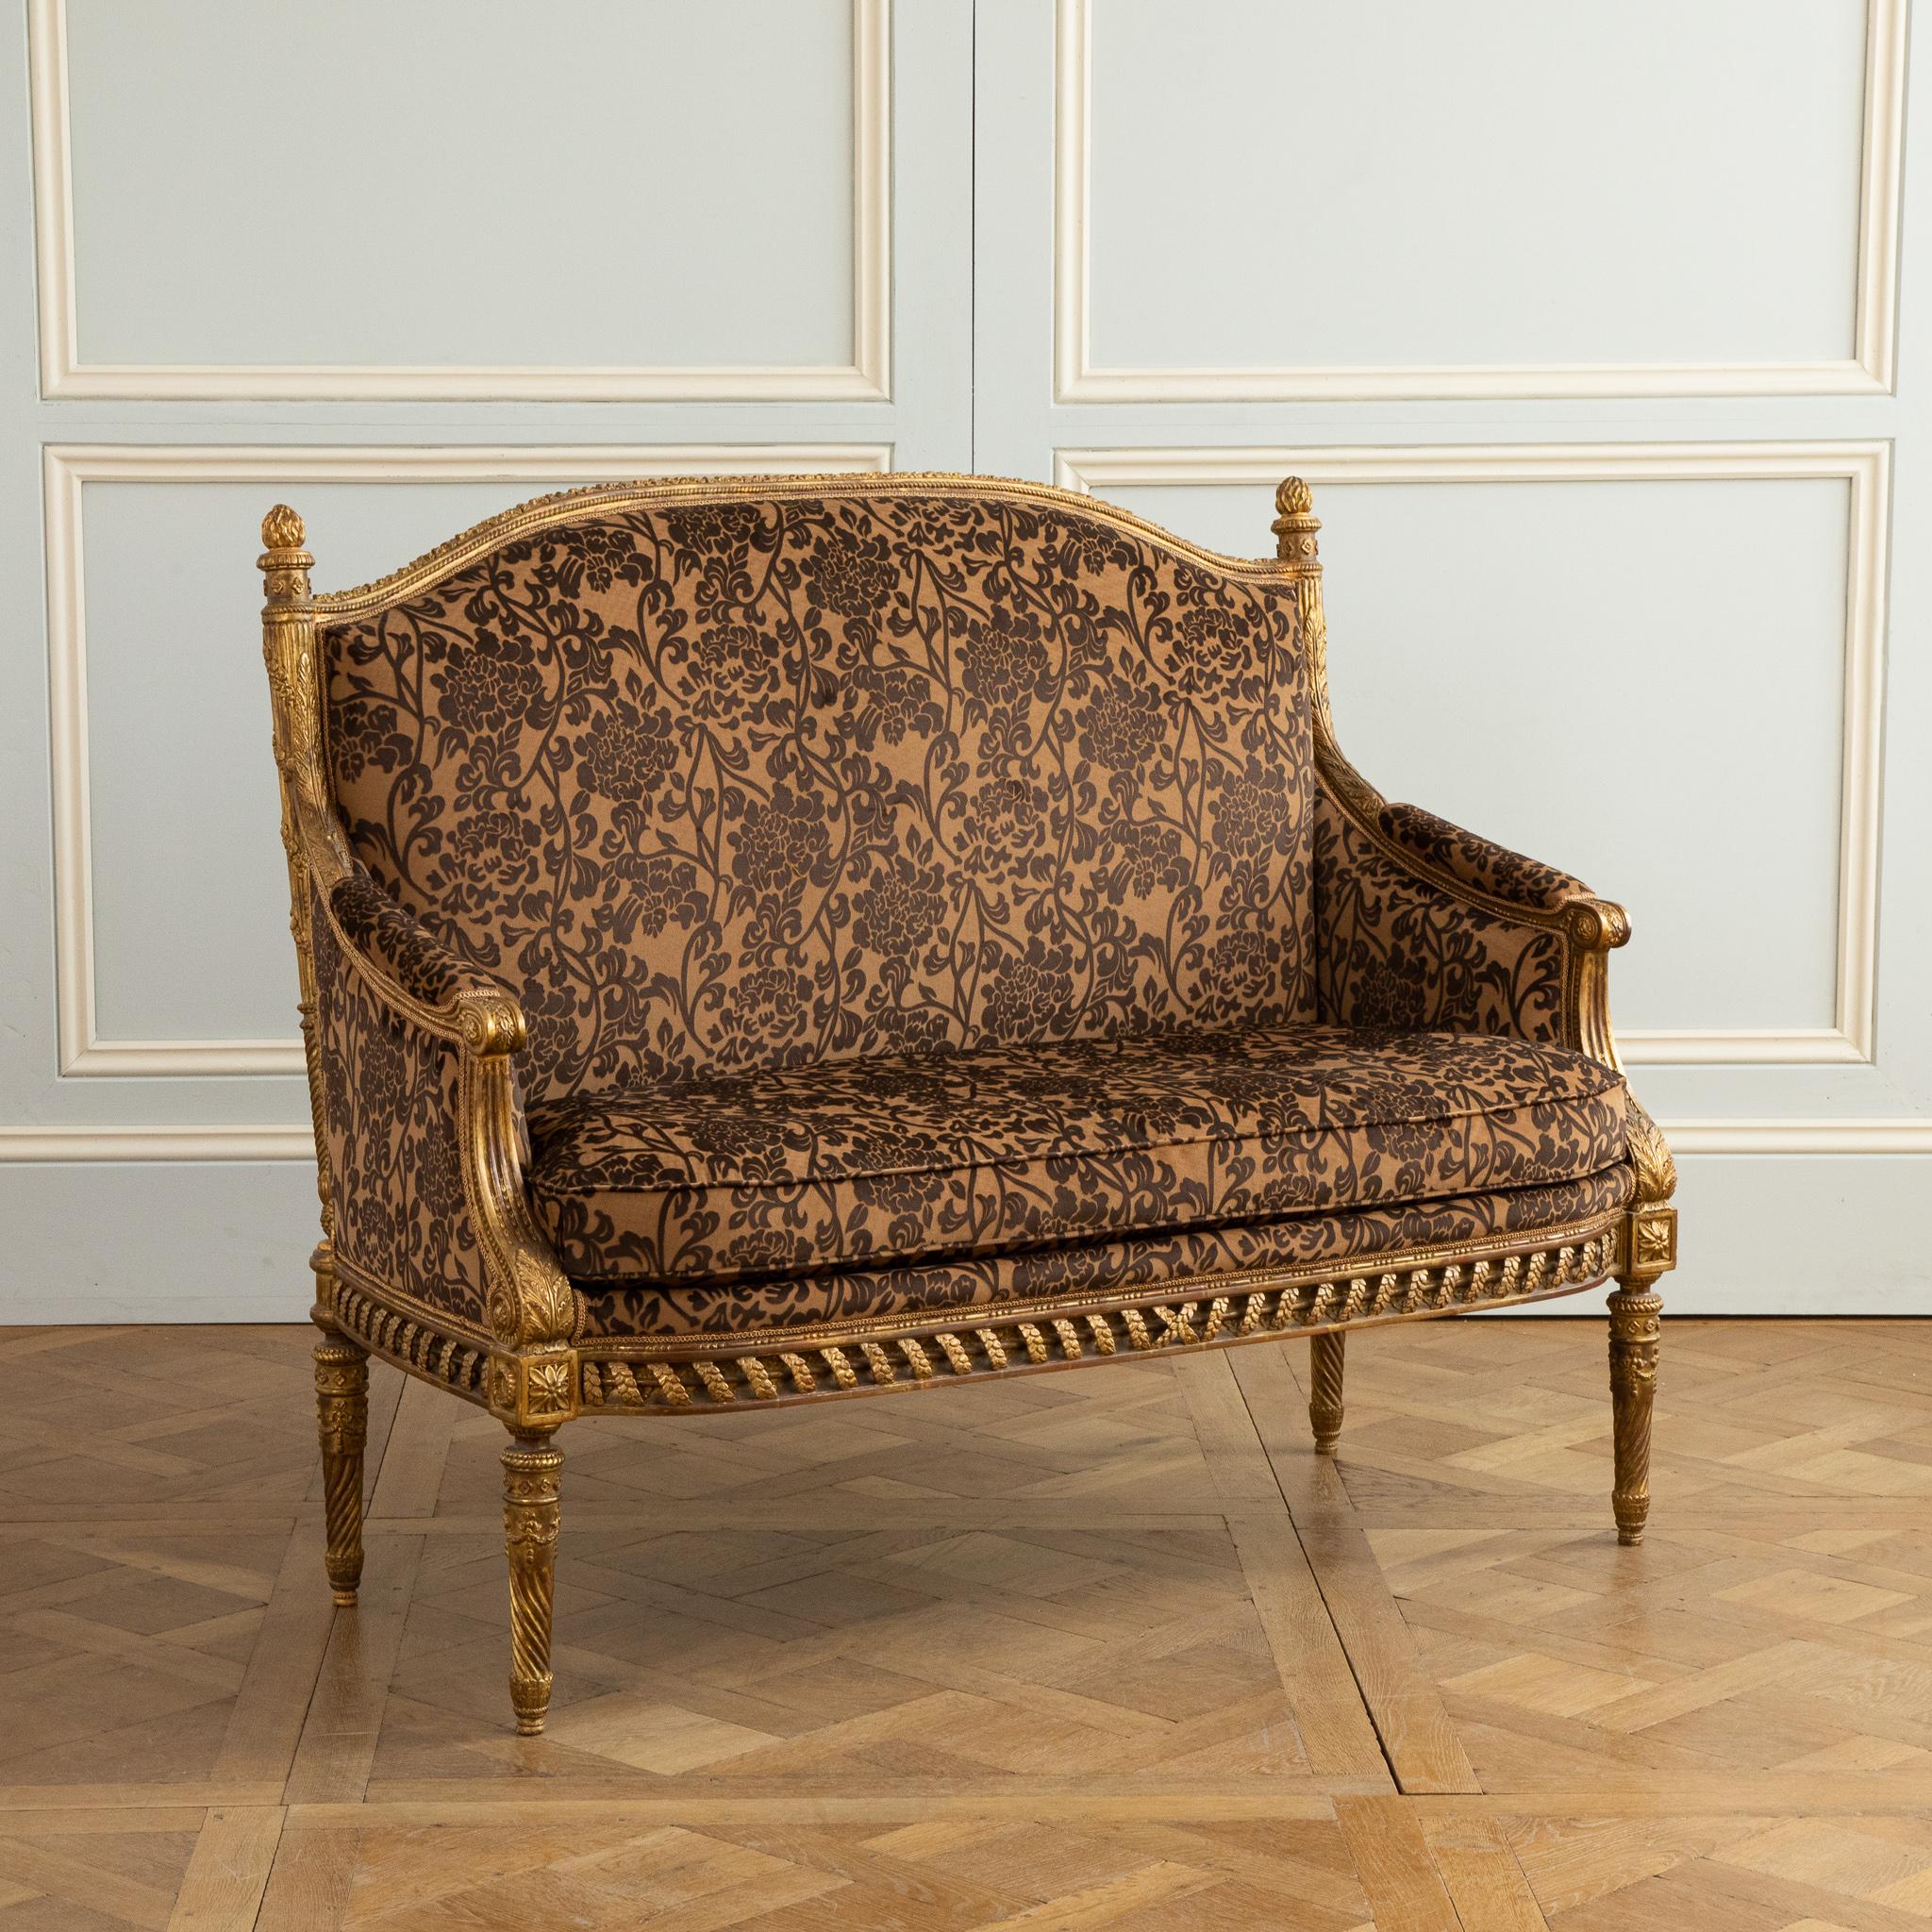  A Finely Carved  Louis XVI Style Giltwood Sofa In New Condition For Sale In London, Park Royal